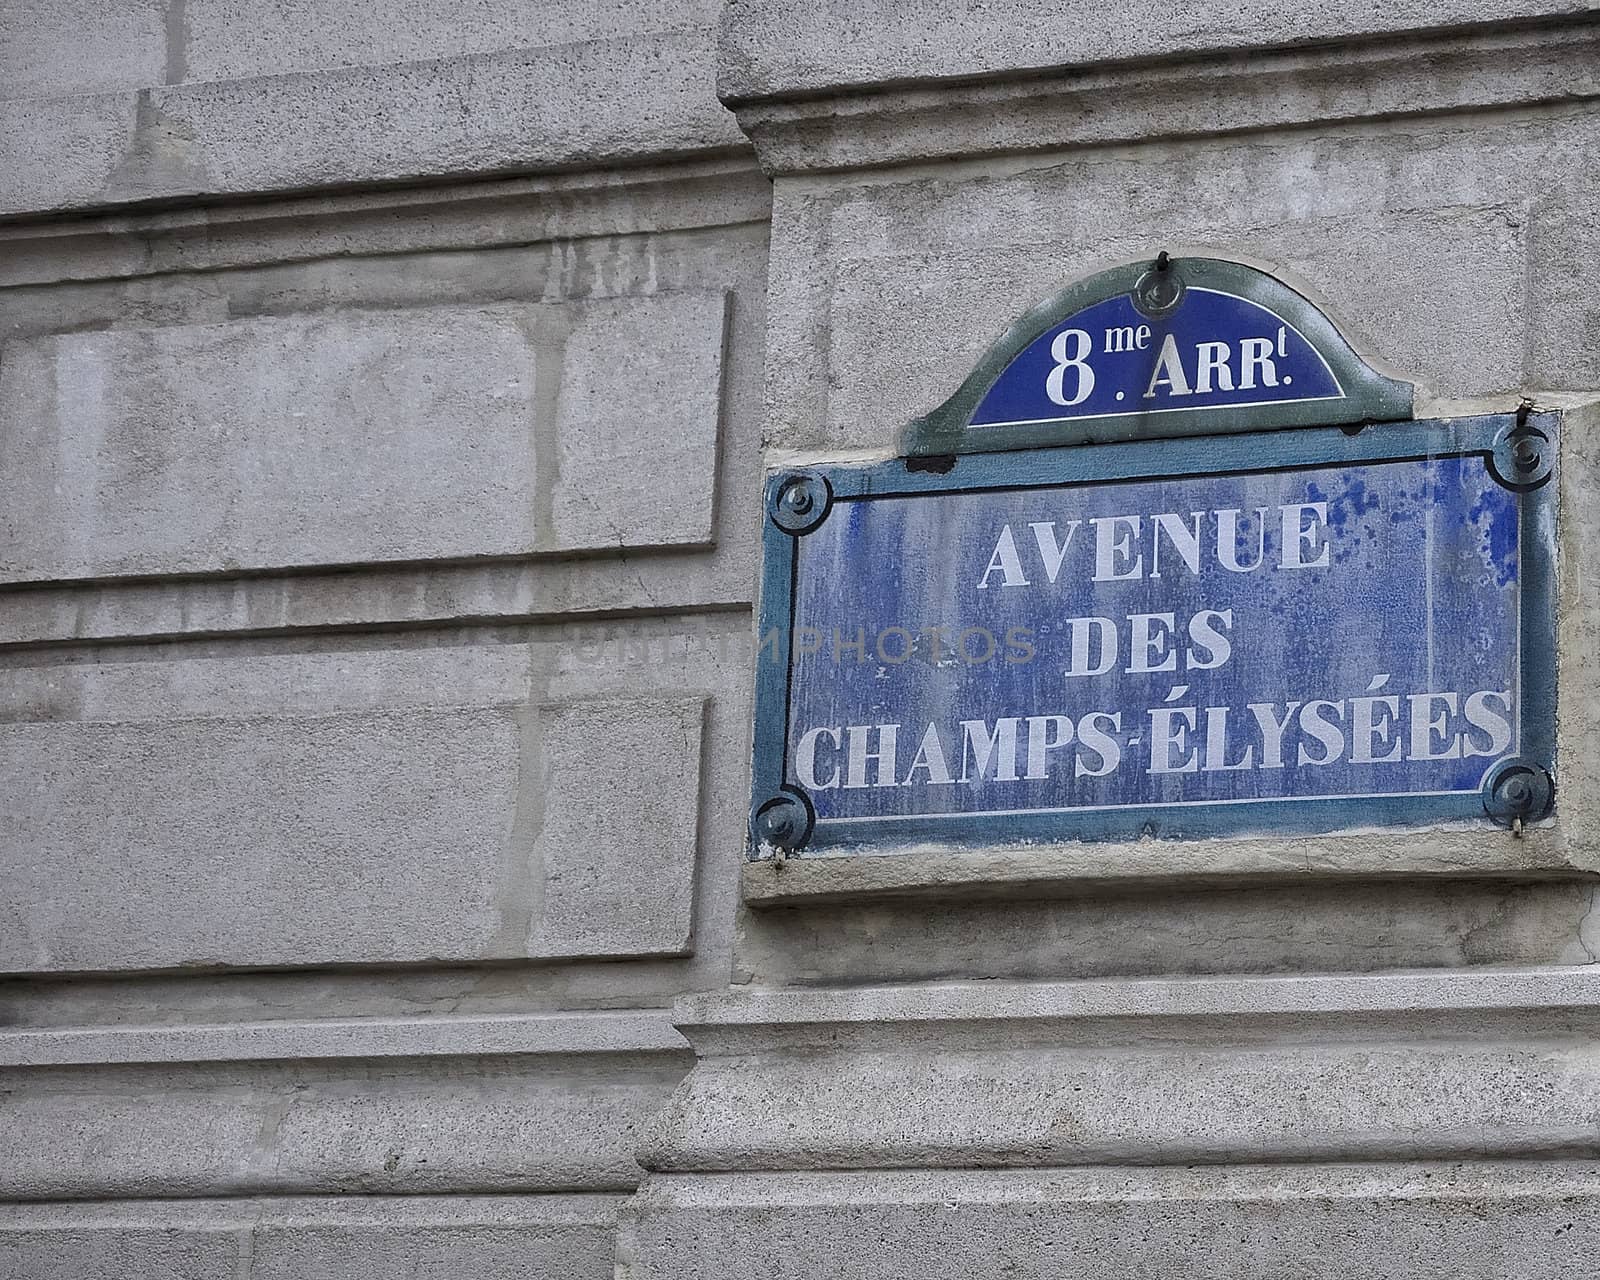 Avenue des Champs-Elysees sign. Rock and steal.